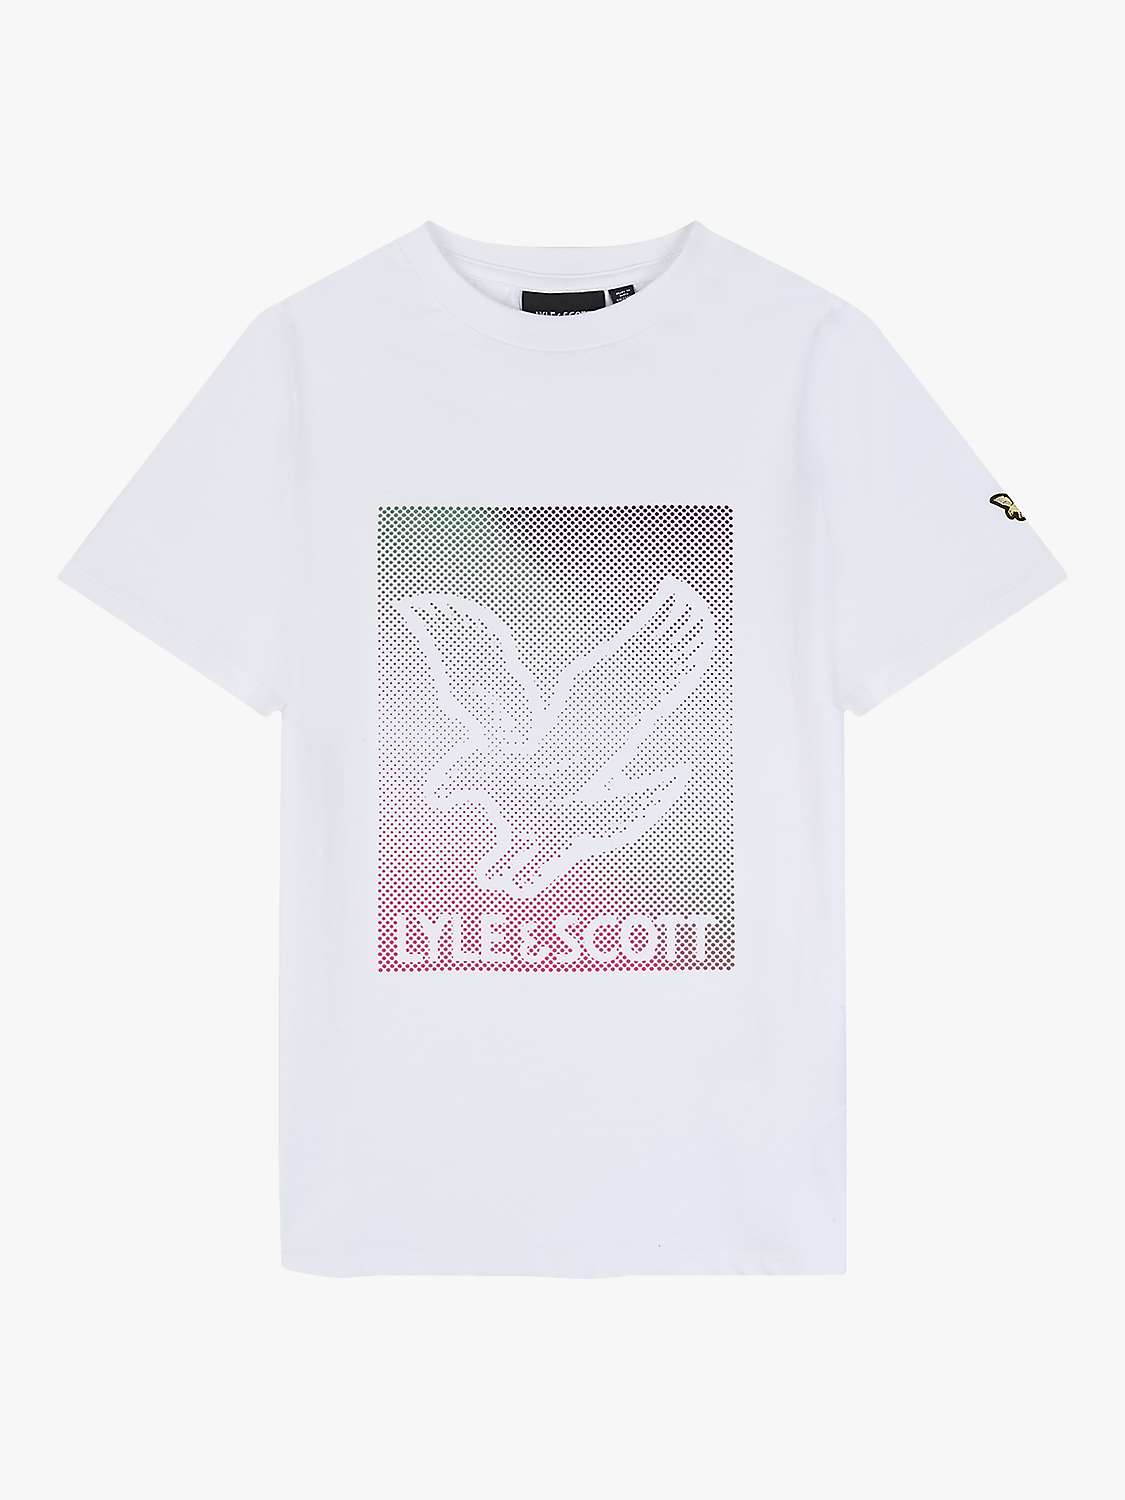 Buy Lyle & Scott Kids' Dotted Eagle Graphic T-Shirt Online at johnlewis.com